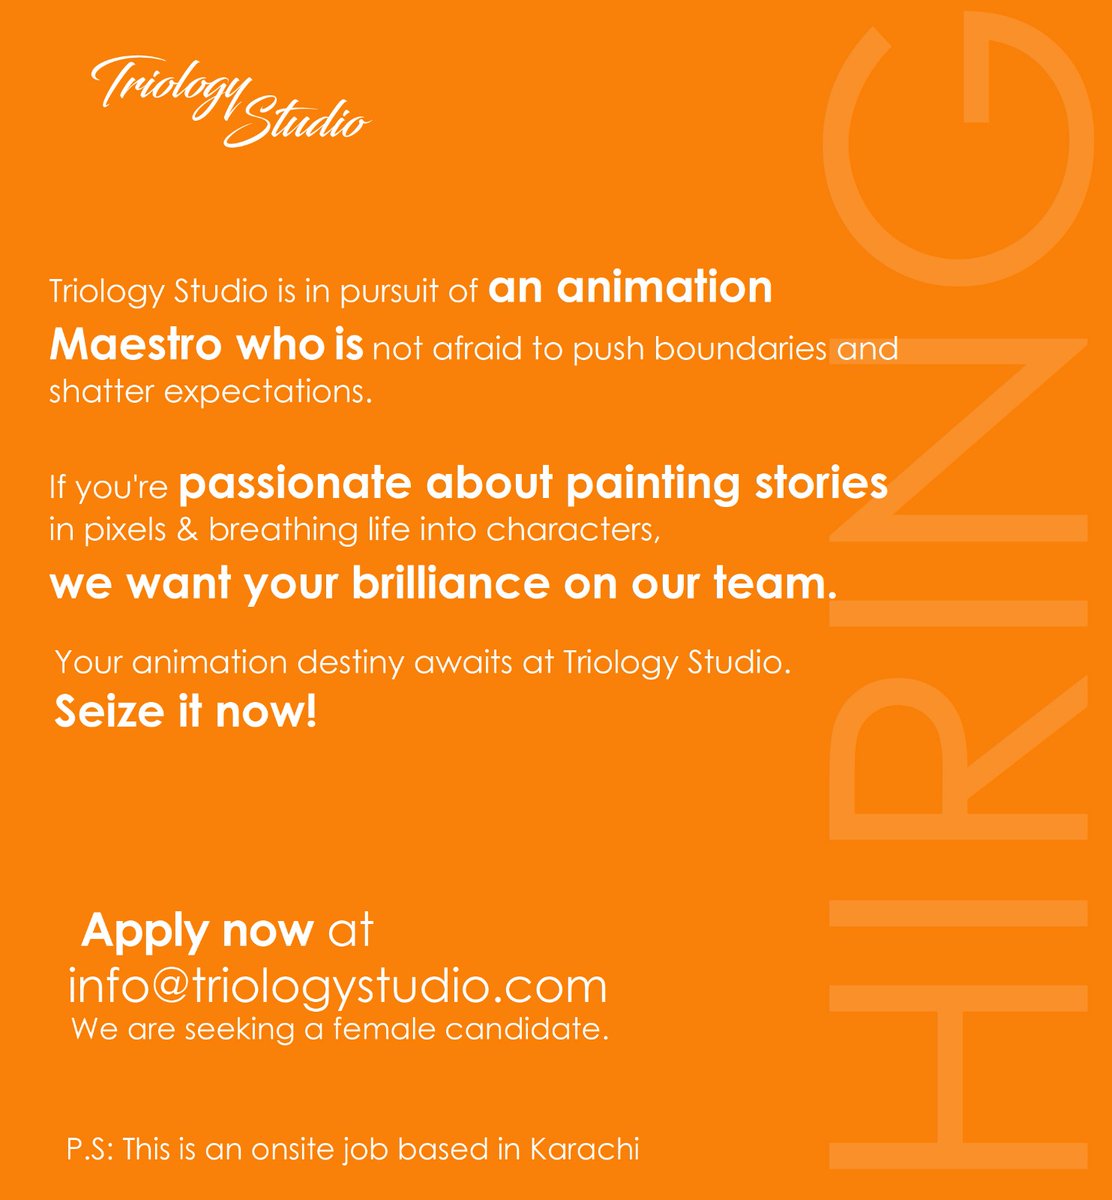 Do you have what it takes?

Apply Now at: info@triologystudio.com

#Hiring #FemaleAnimator #TriologyStudio